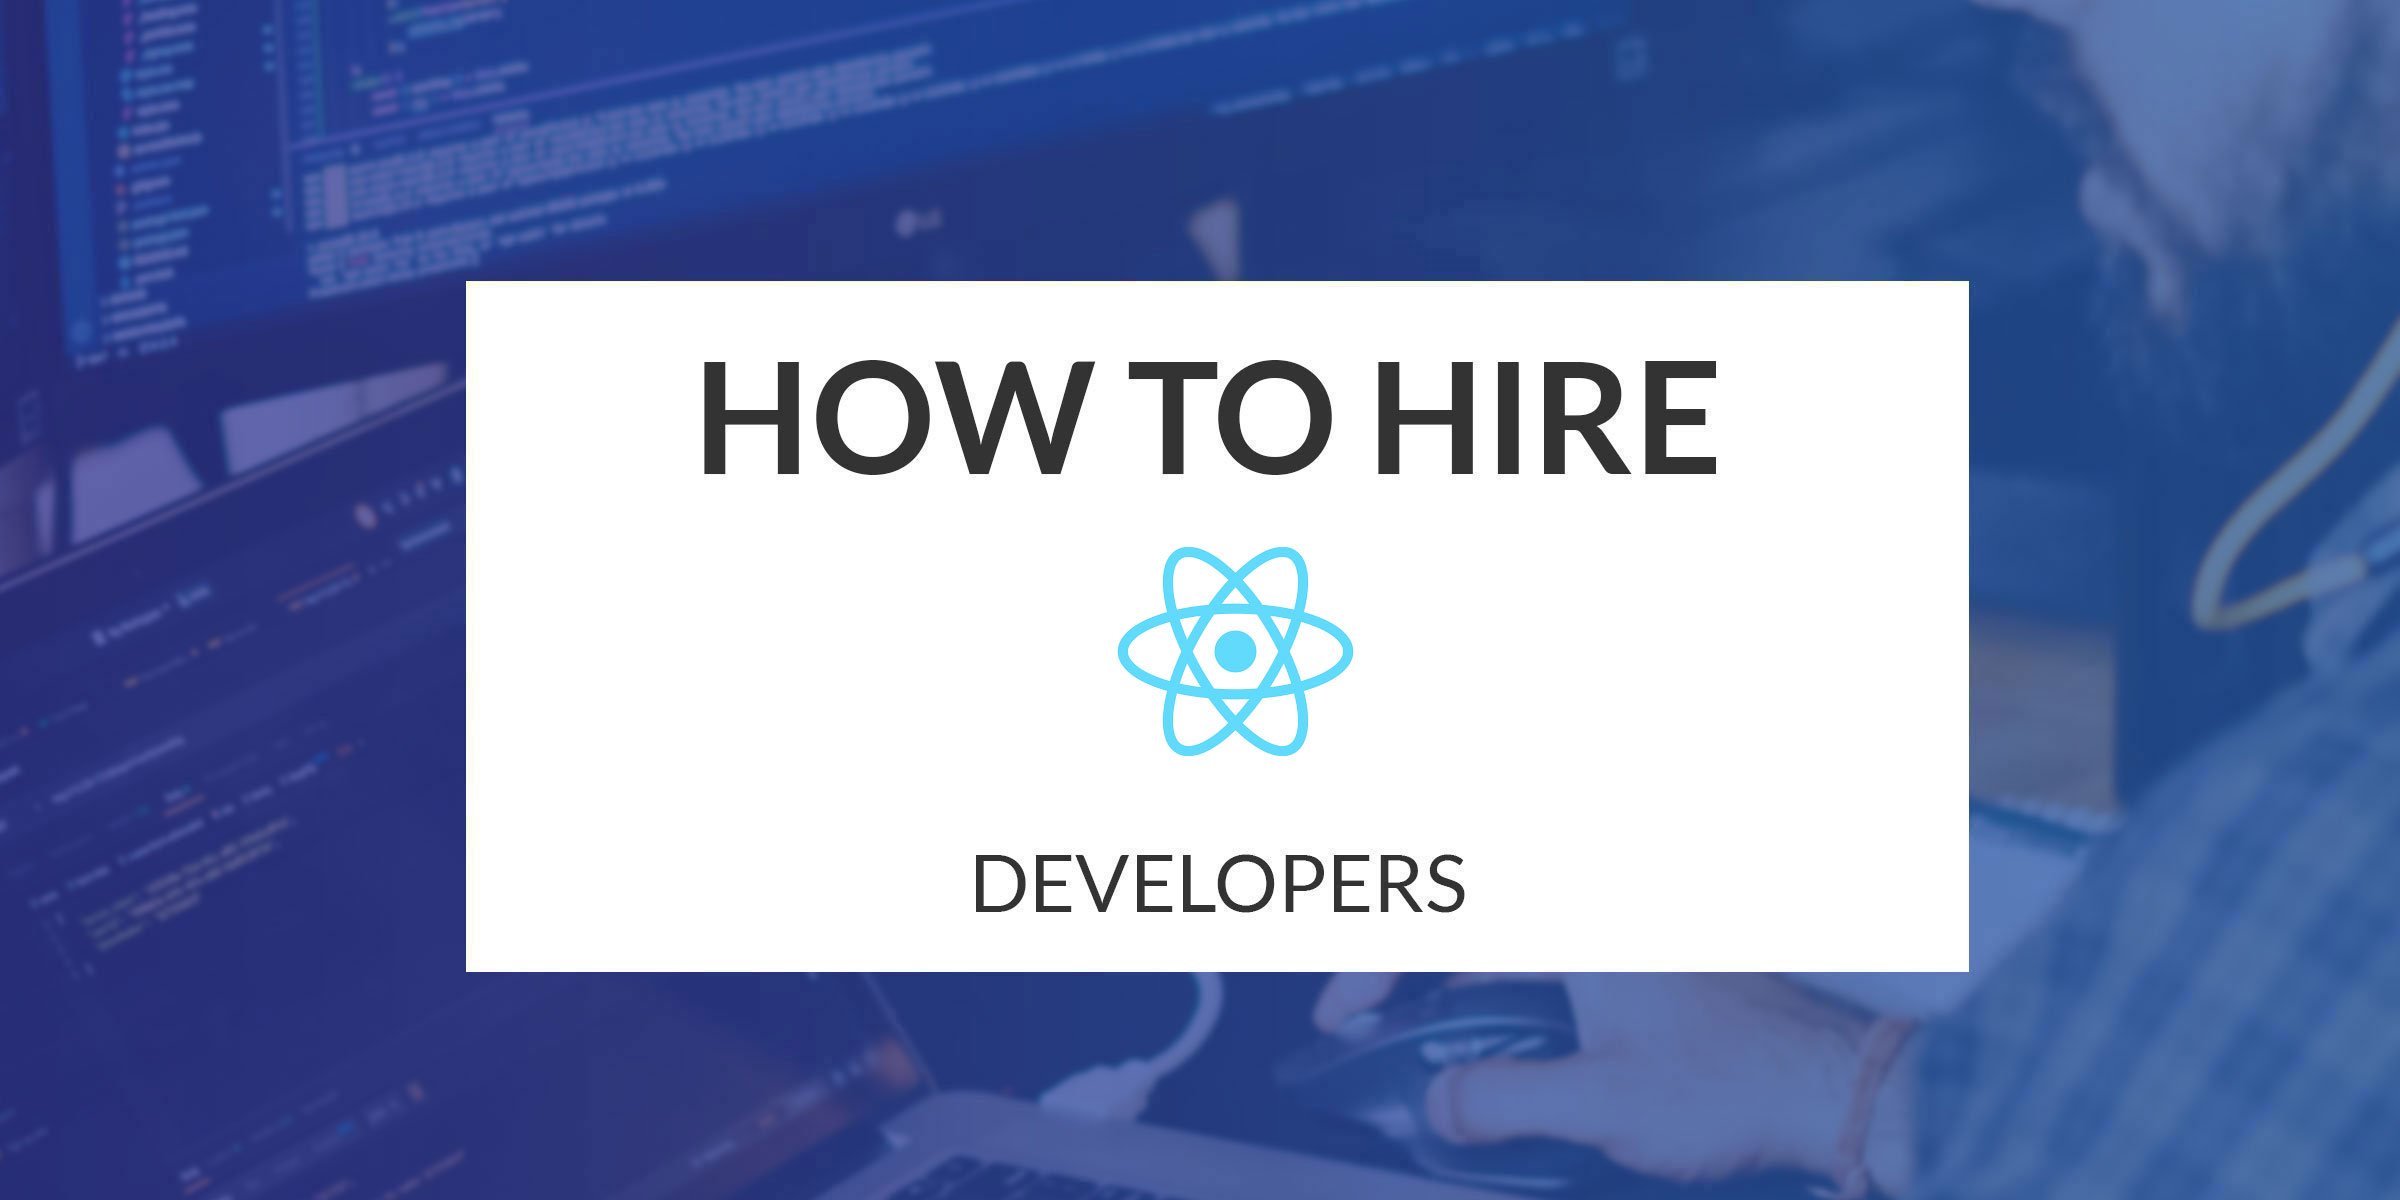 How to Find & Hire Top ReactJS Developers? Guide (2021)